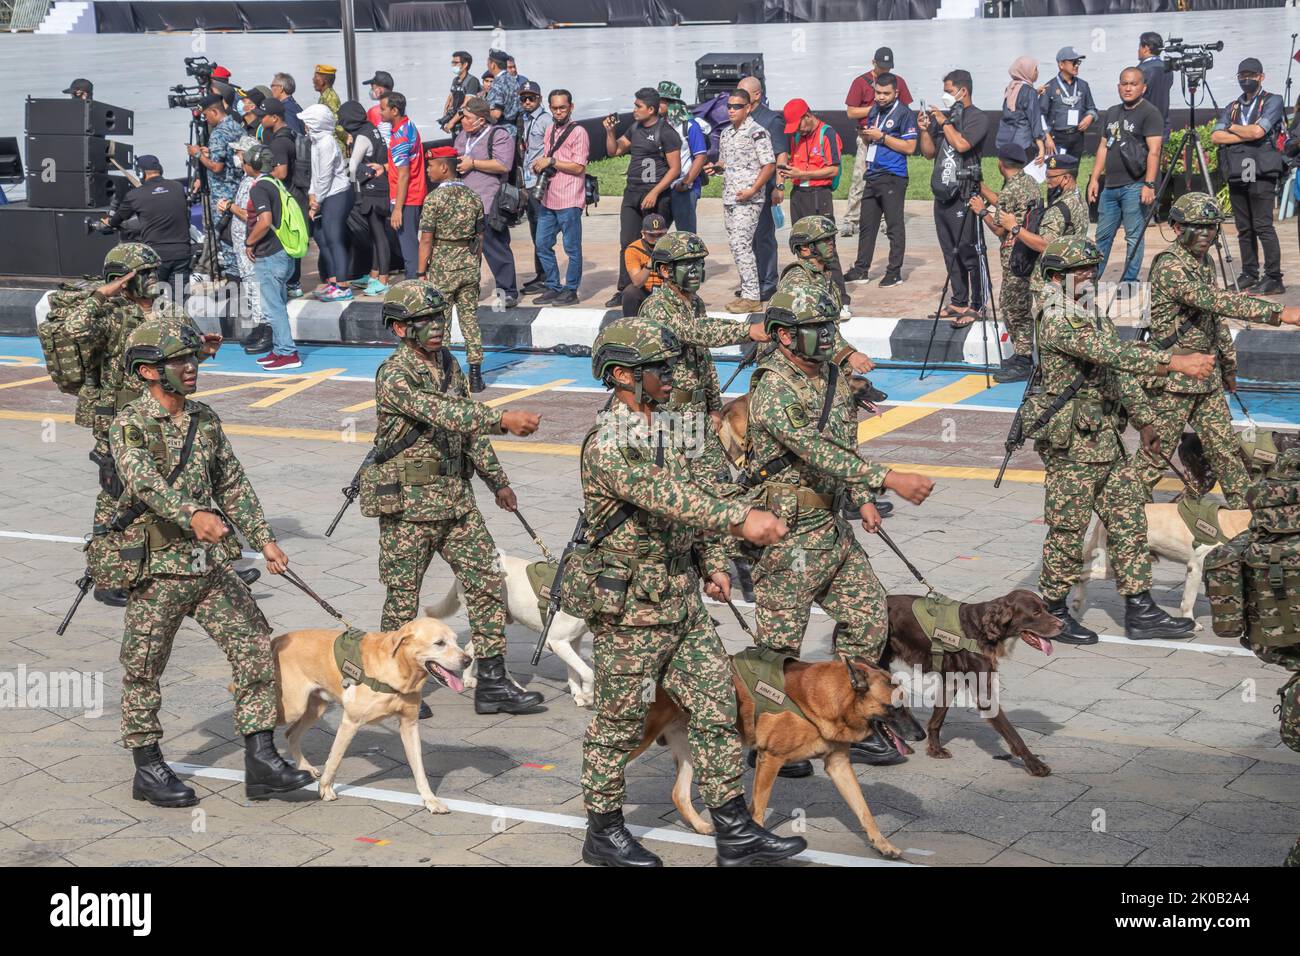 Handlers and canines of Malaysian Army during 65th National Day parade in Kuala Lumpur, Malaysia. Stock Photo